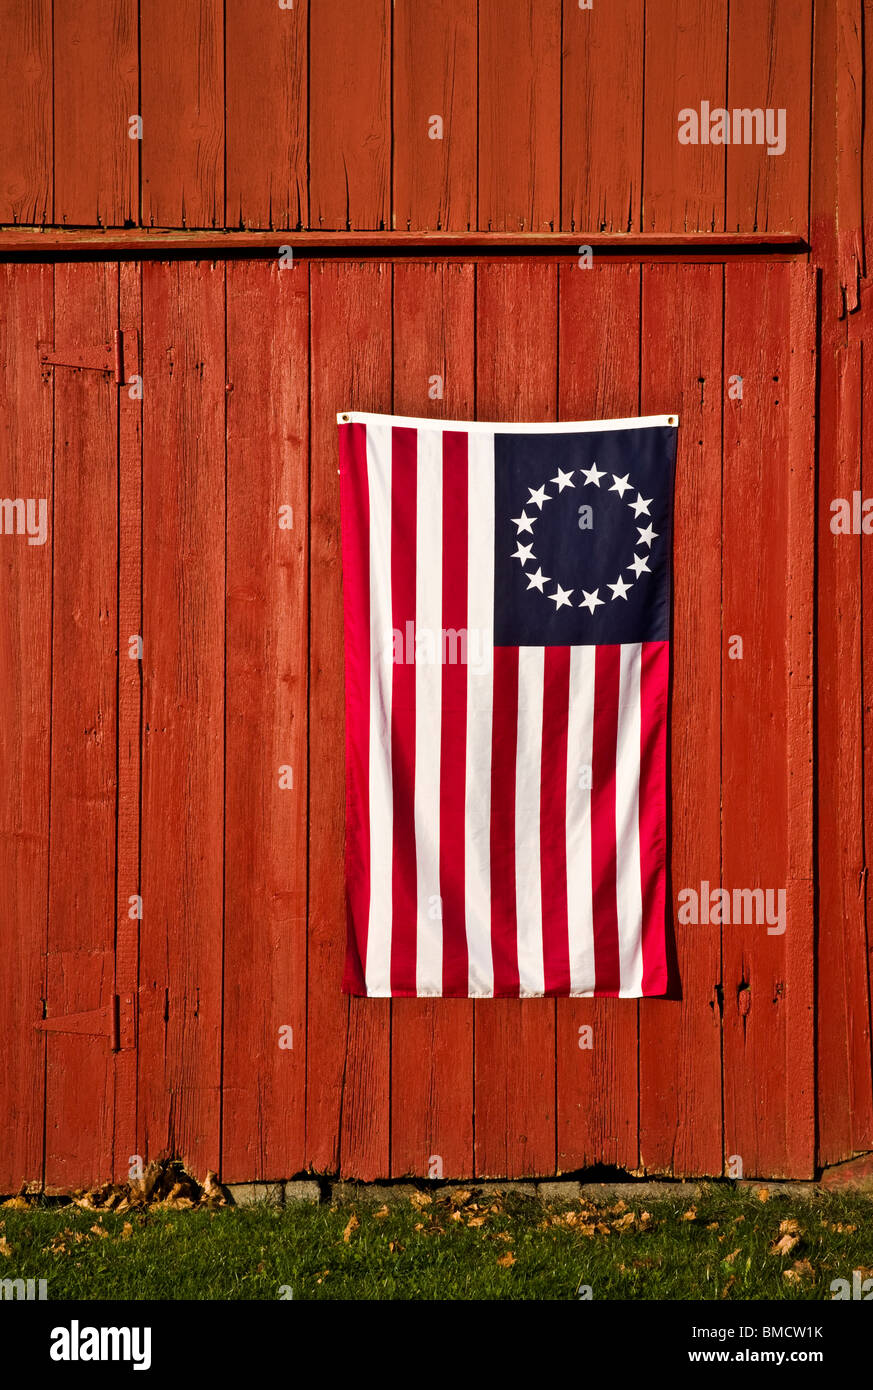 Close up replica of a vintage American flag, 13 stars and srripes, Betsy Ross on old red barn, New Jersey, United States flag, US flag close up Stock Photo